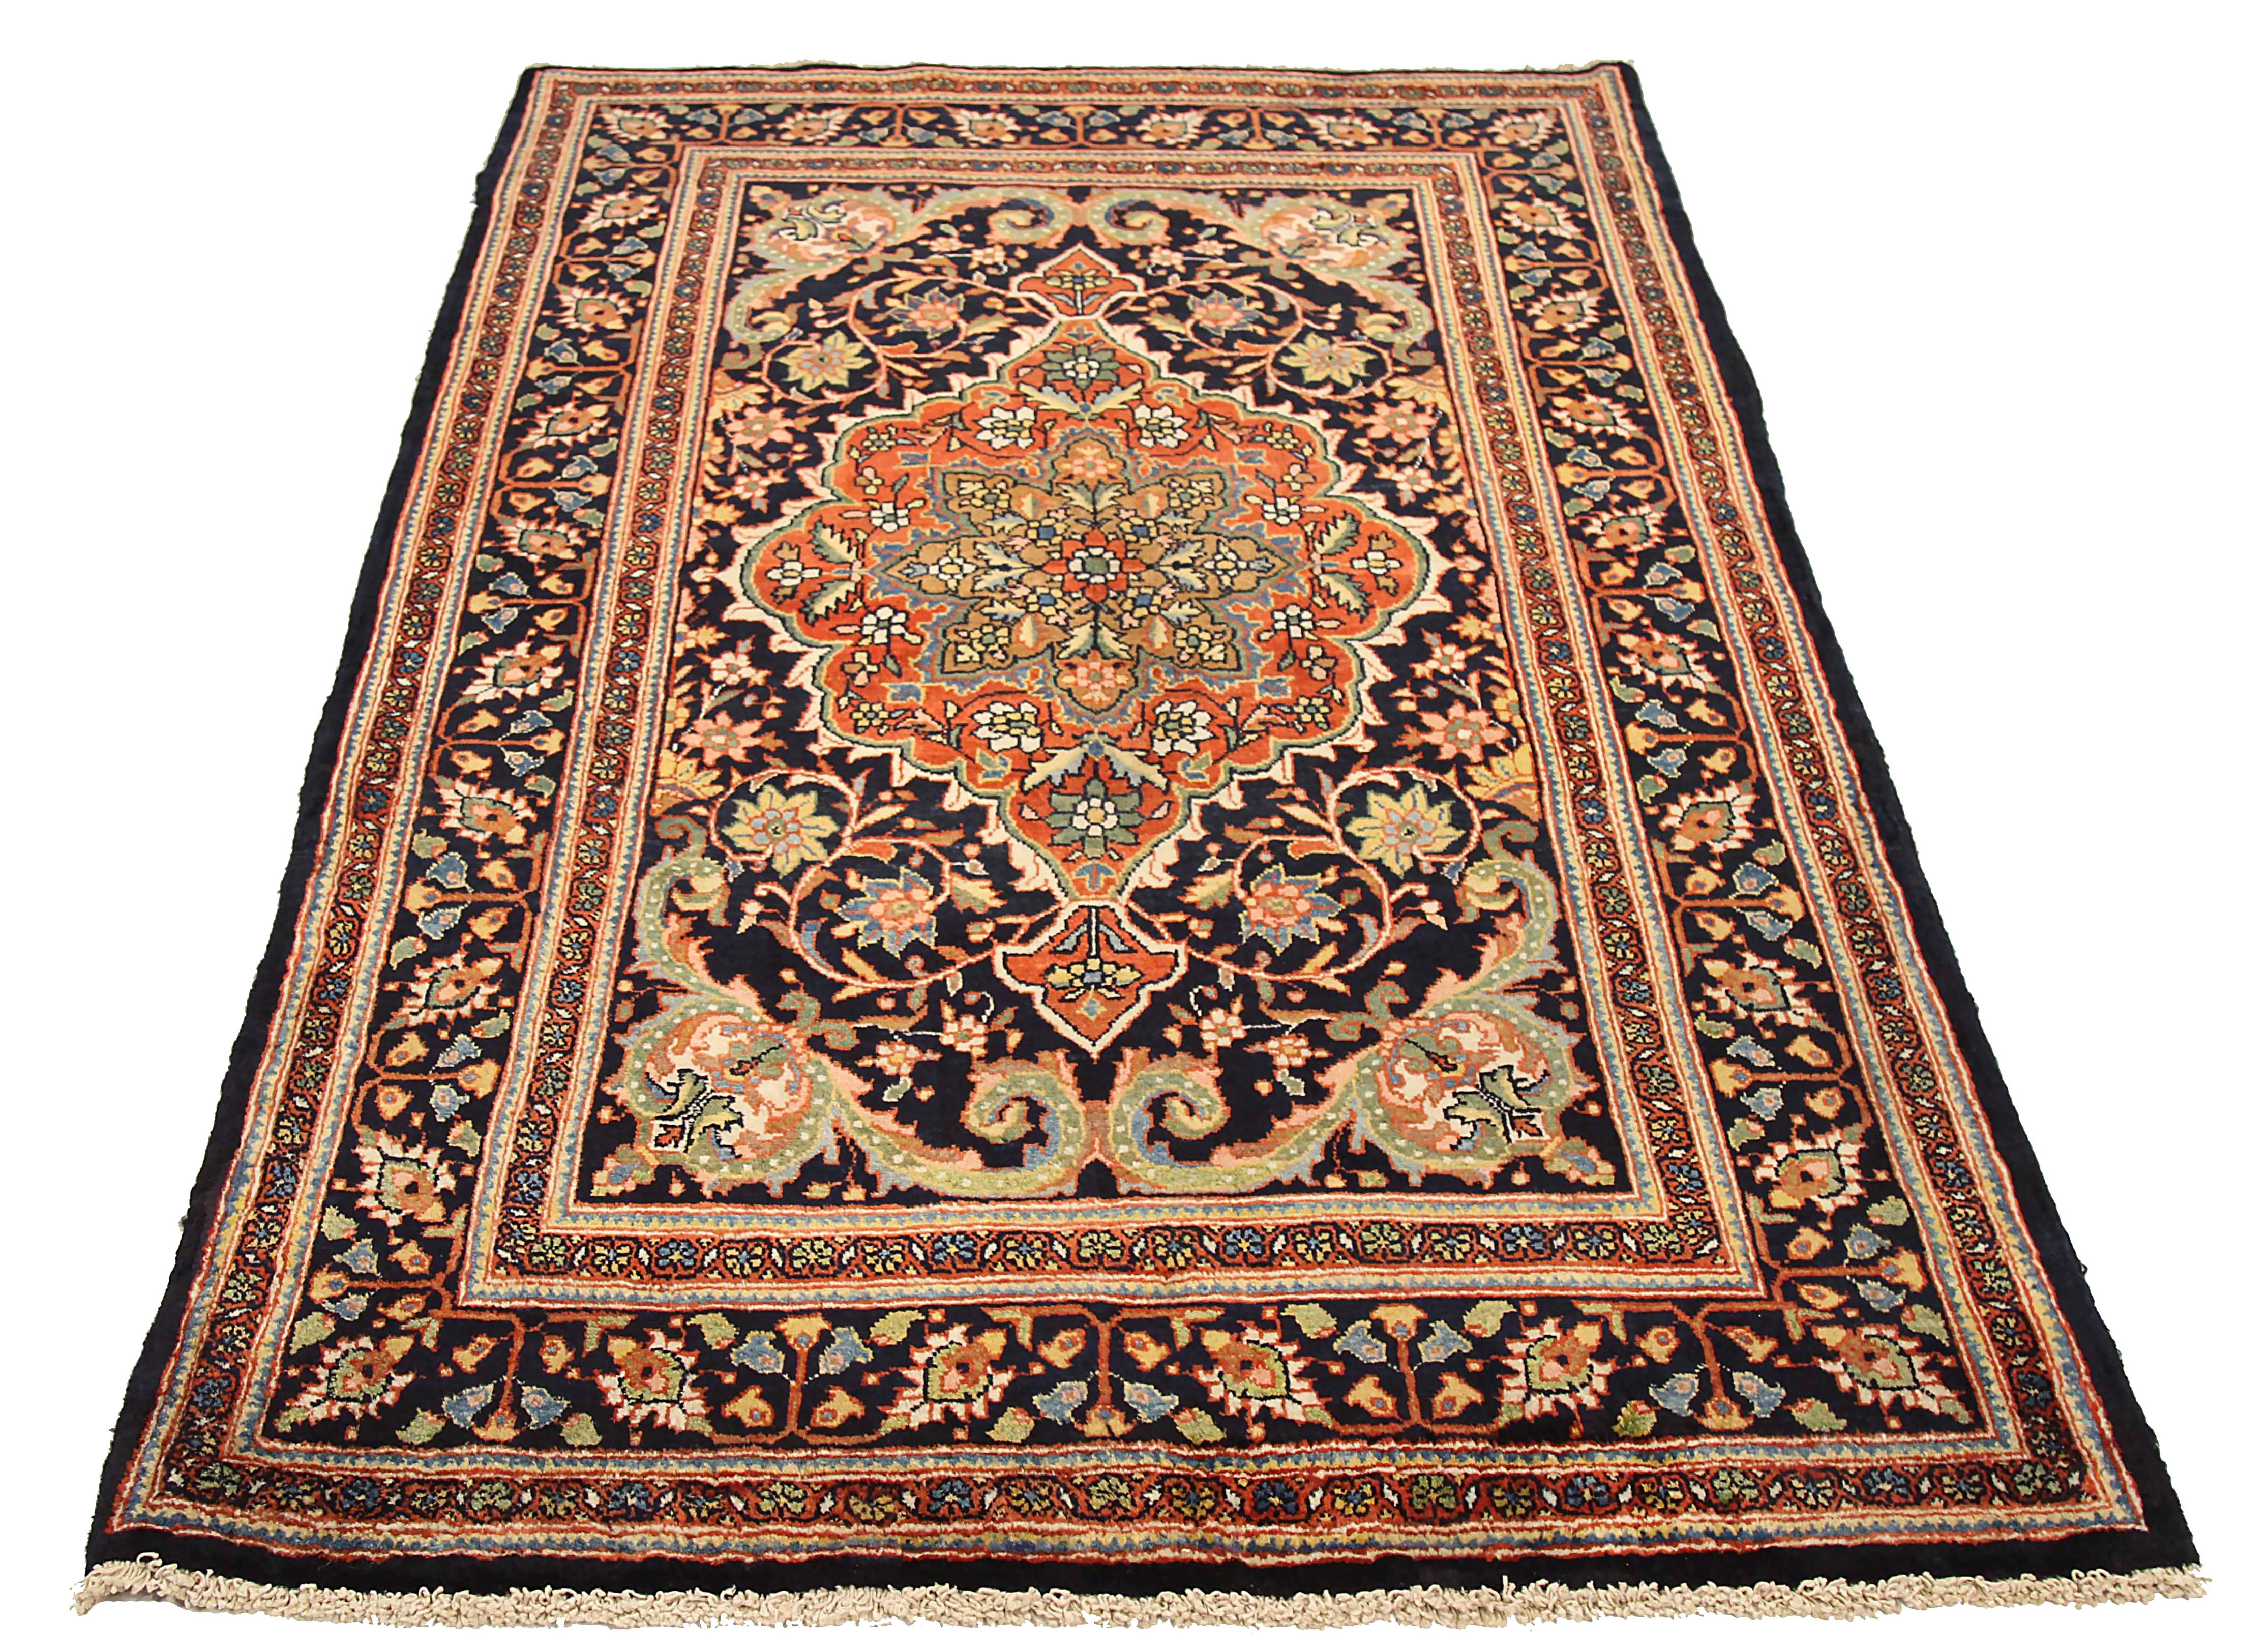 Antique Persian area rug handwoven from the finest sheep’s wool. It’s colored with all-natural vegetable dyes that are safe for humans and pets. It’s a traditional Kermanshah design handwoven by expert artisans. It’s a lovely area rug that can be